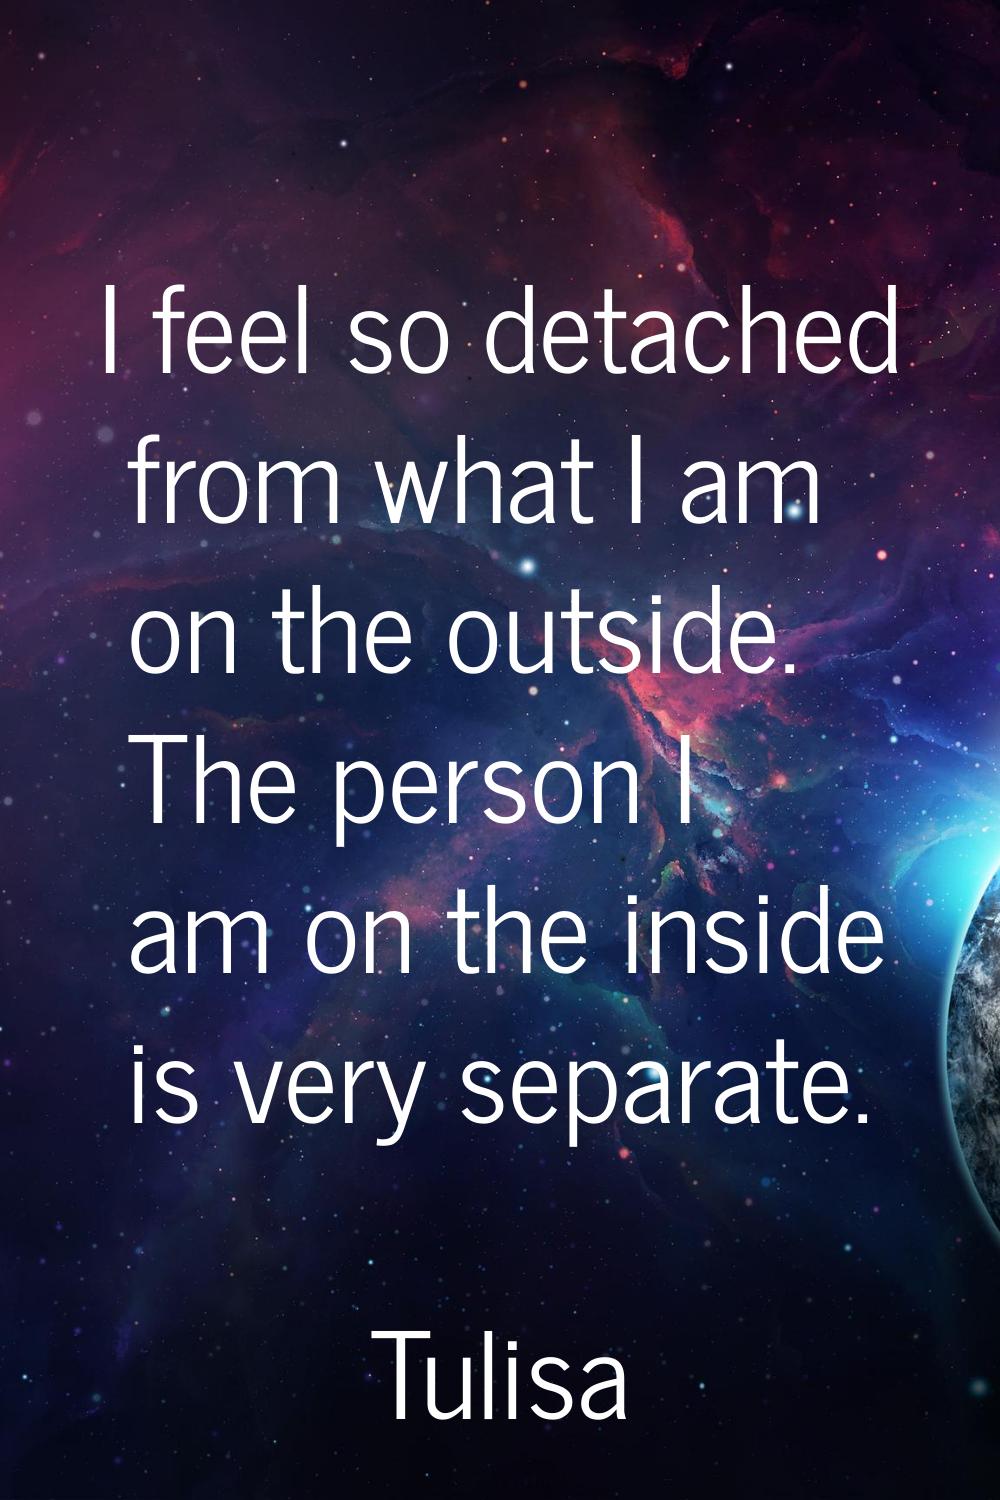 I feel so detached from what I am on the outside. The person I am on the inside is very separate.